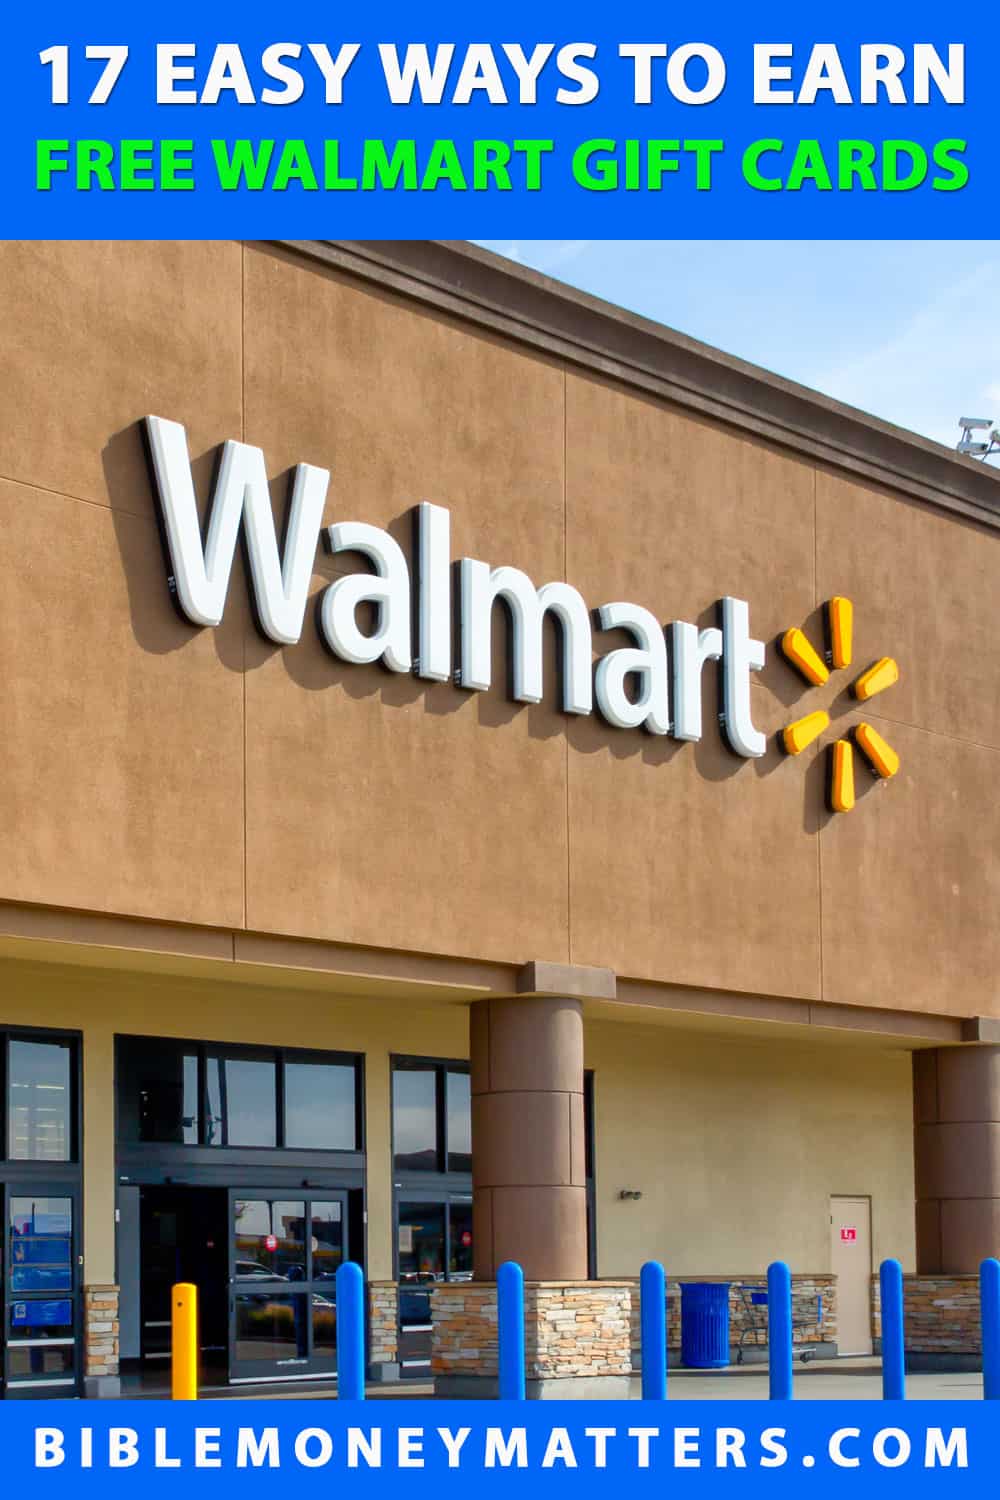 17 Easy Ways To Earn Free Walmart Gift Cards